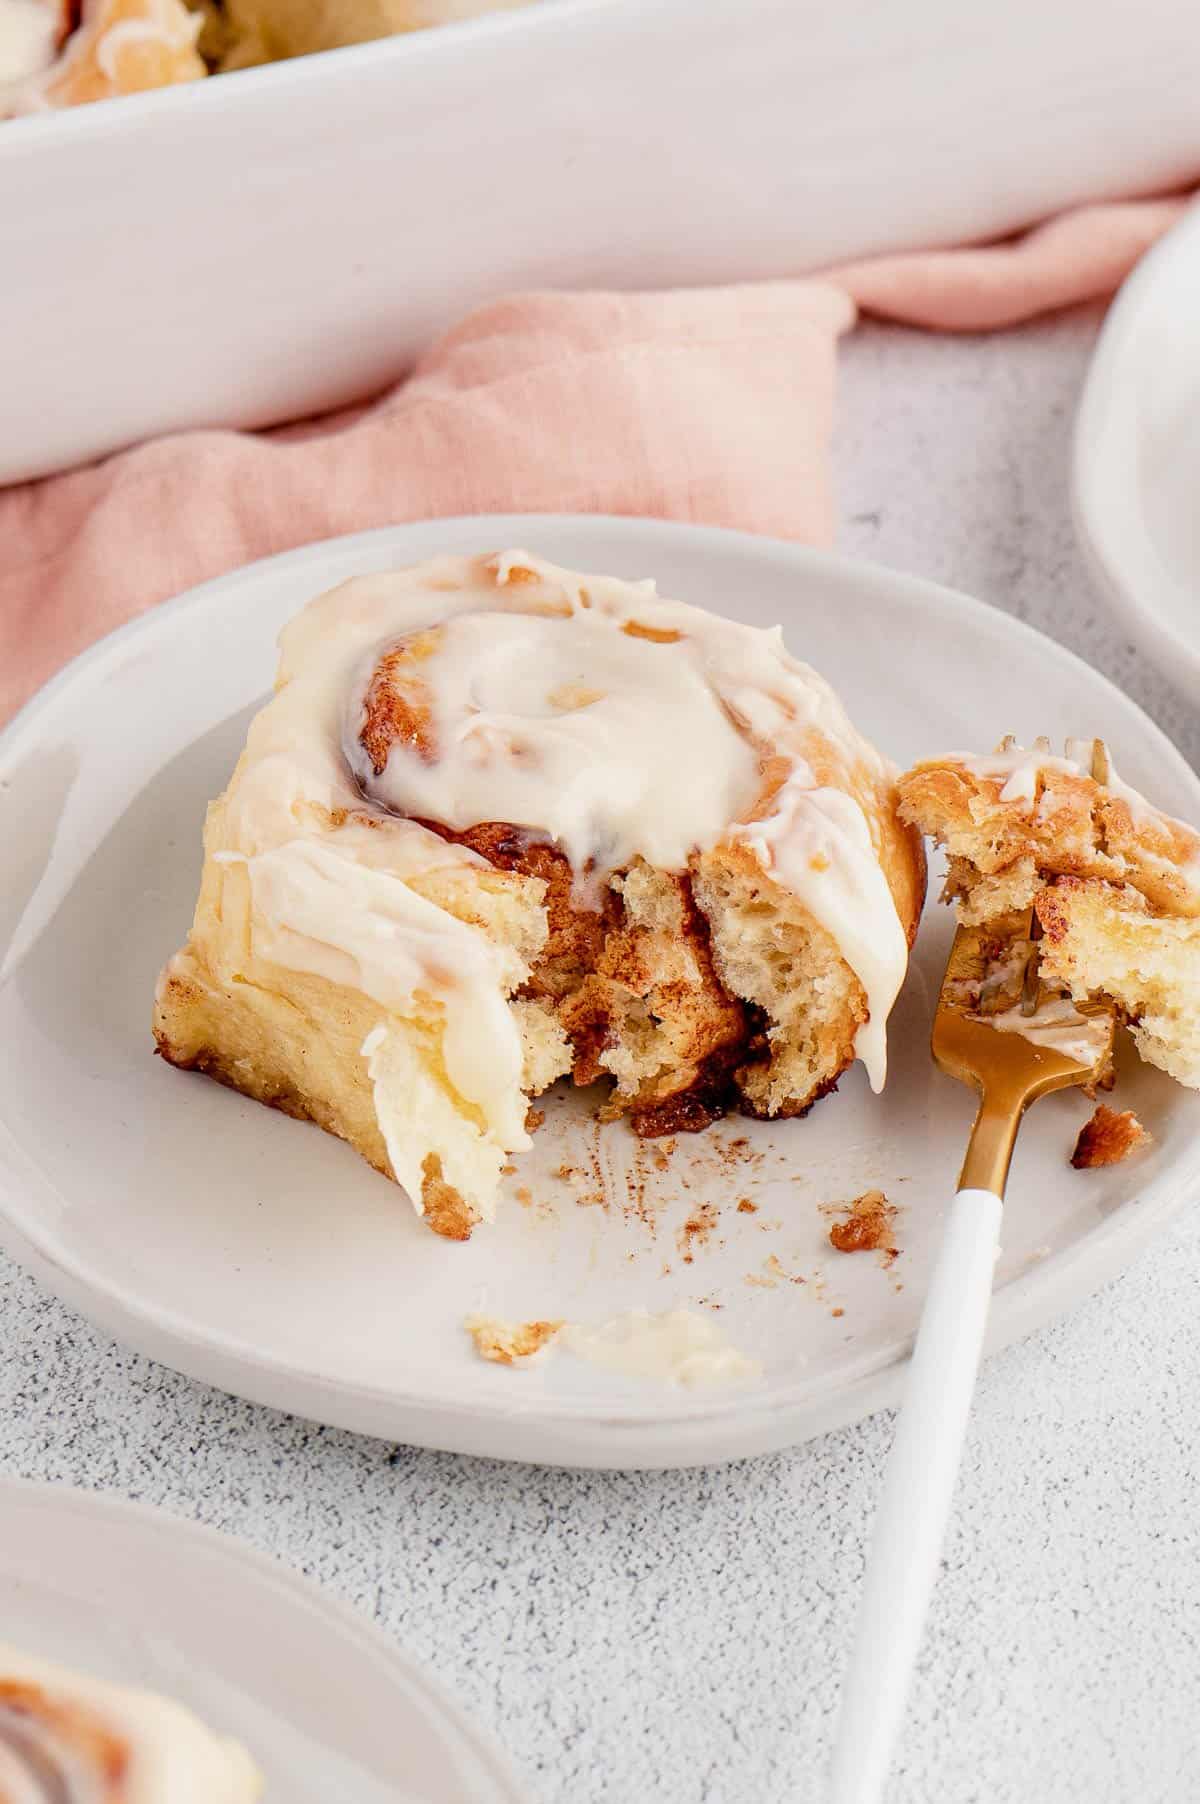 A frosted overnight cinnamon roll on a white plate with a forkful missing.